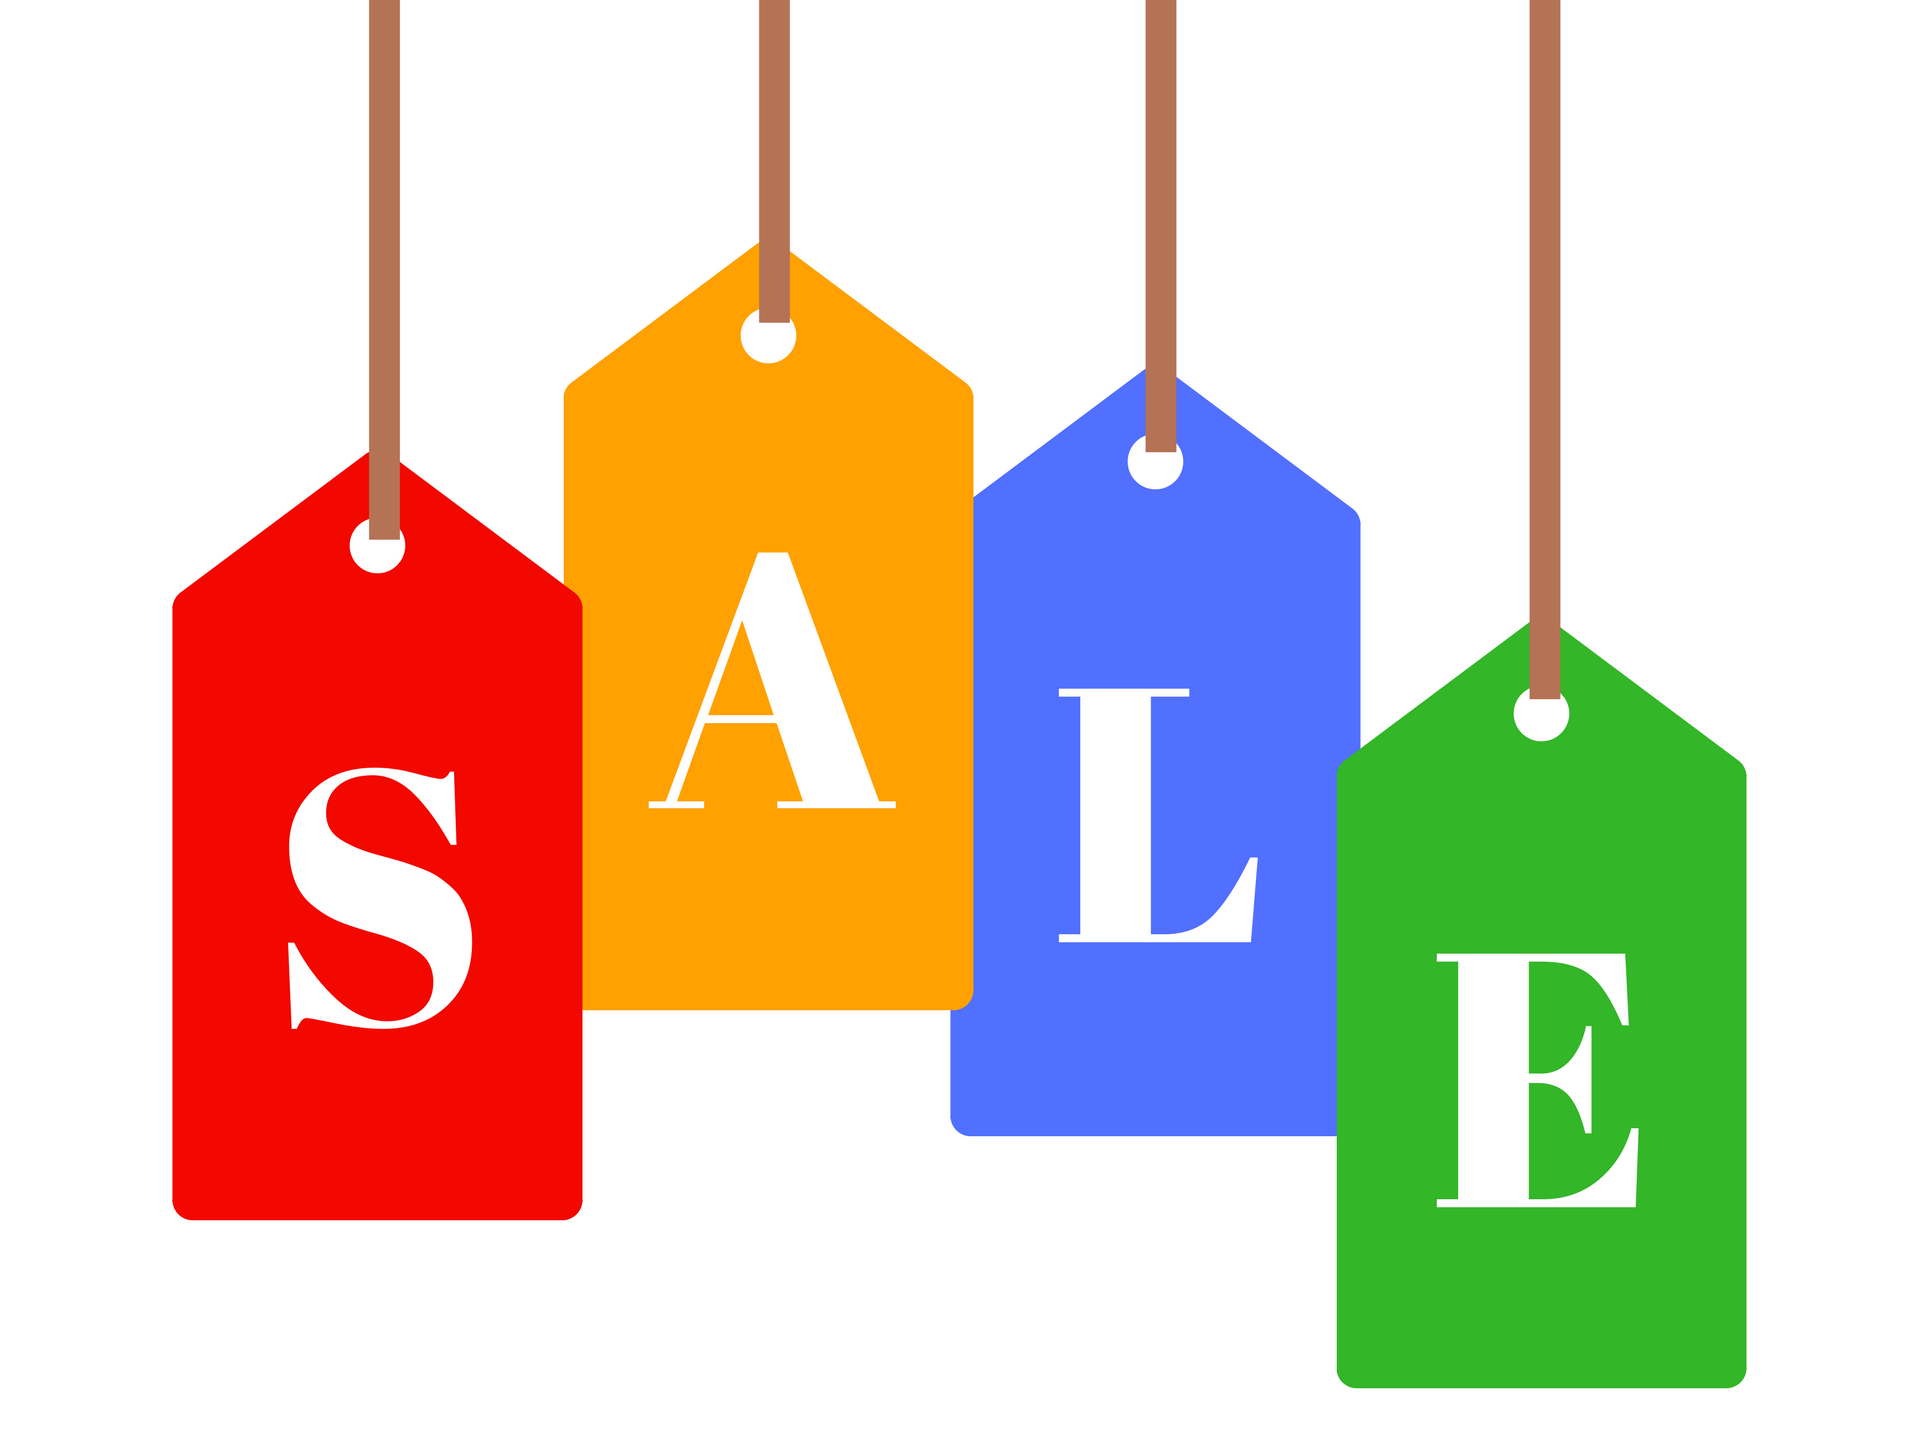 Colorful Sale Sign